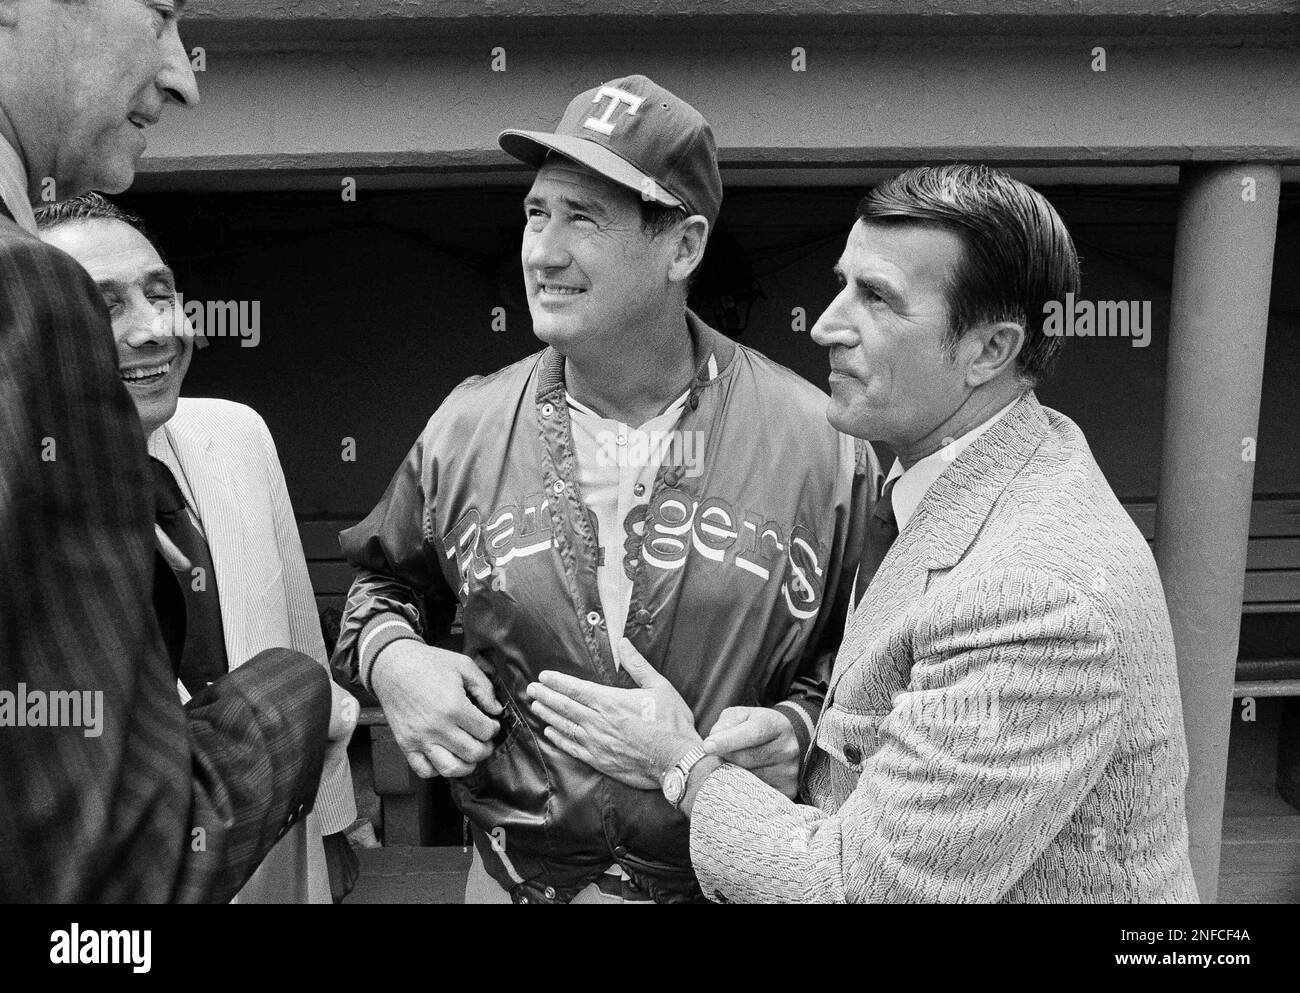 Texas Rangers manager Ted Williams and baseball broadcaster Johnny